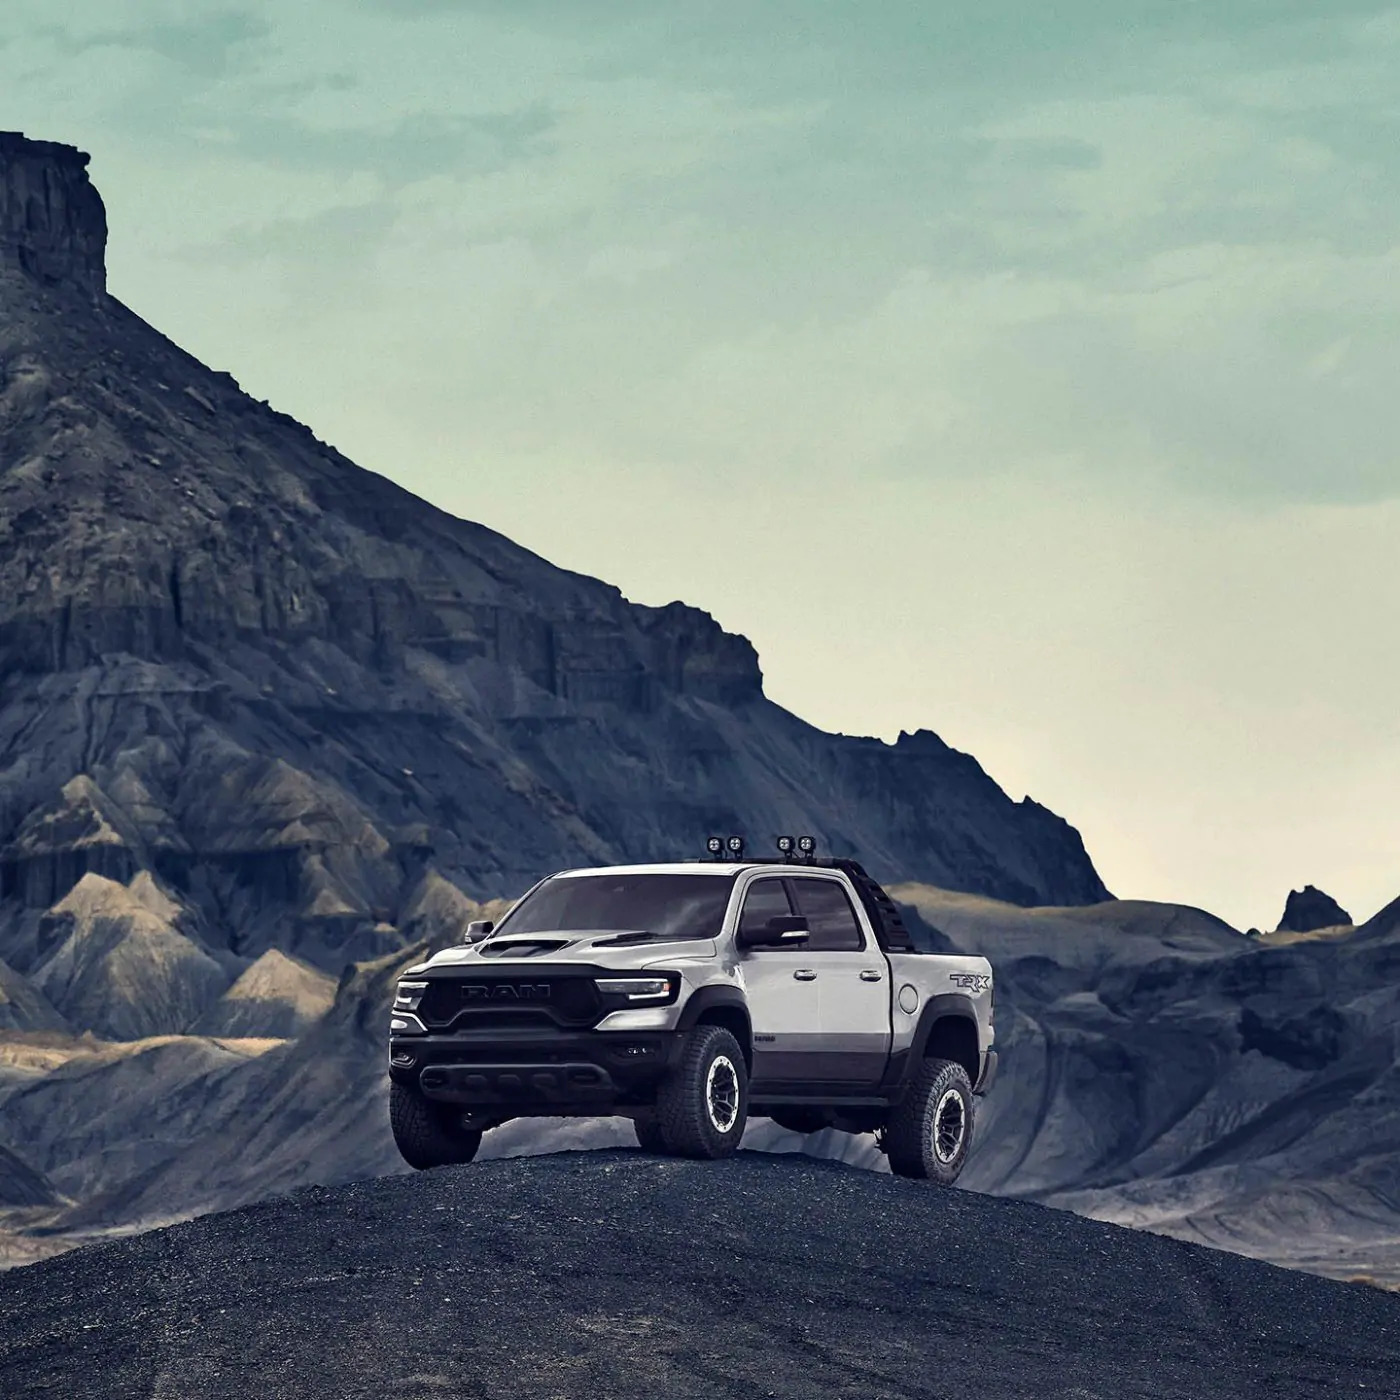 The 2021 Ram 1500 TRX parked against a mountain backdrop.